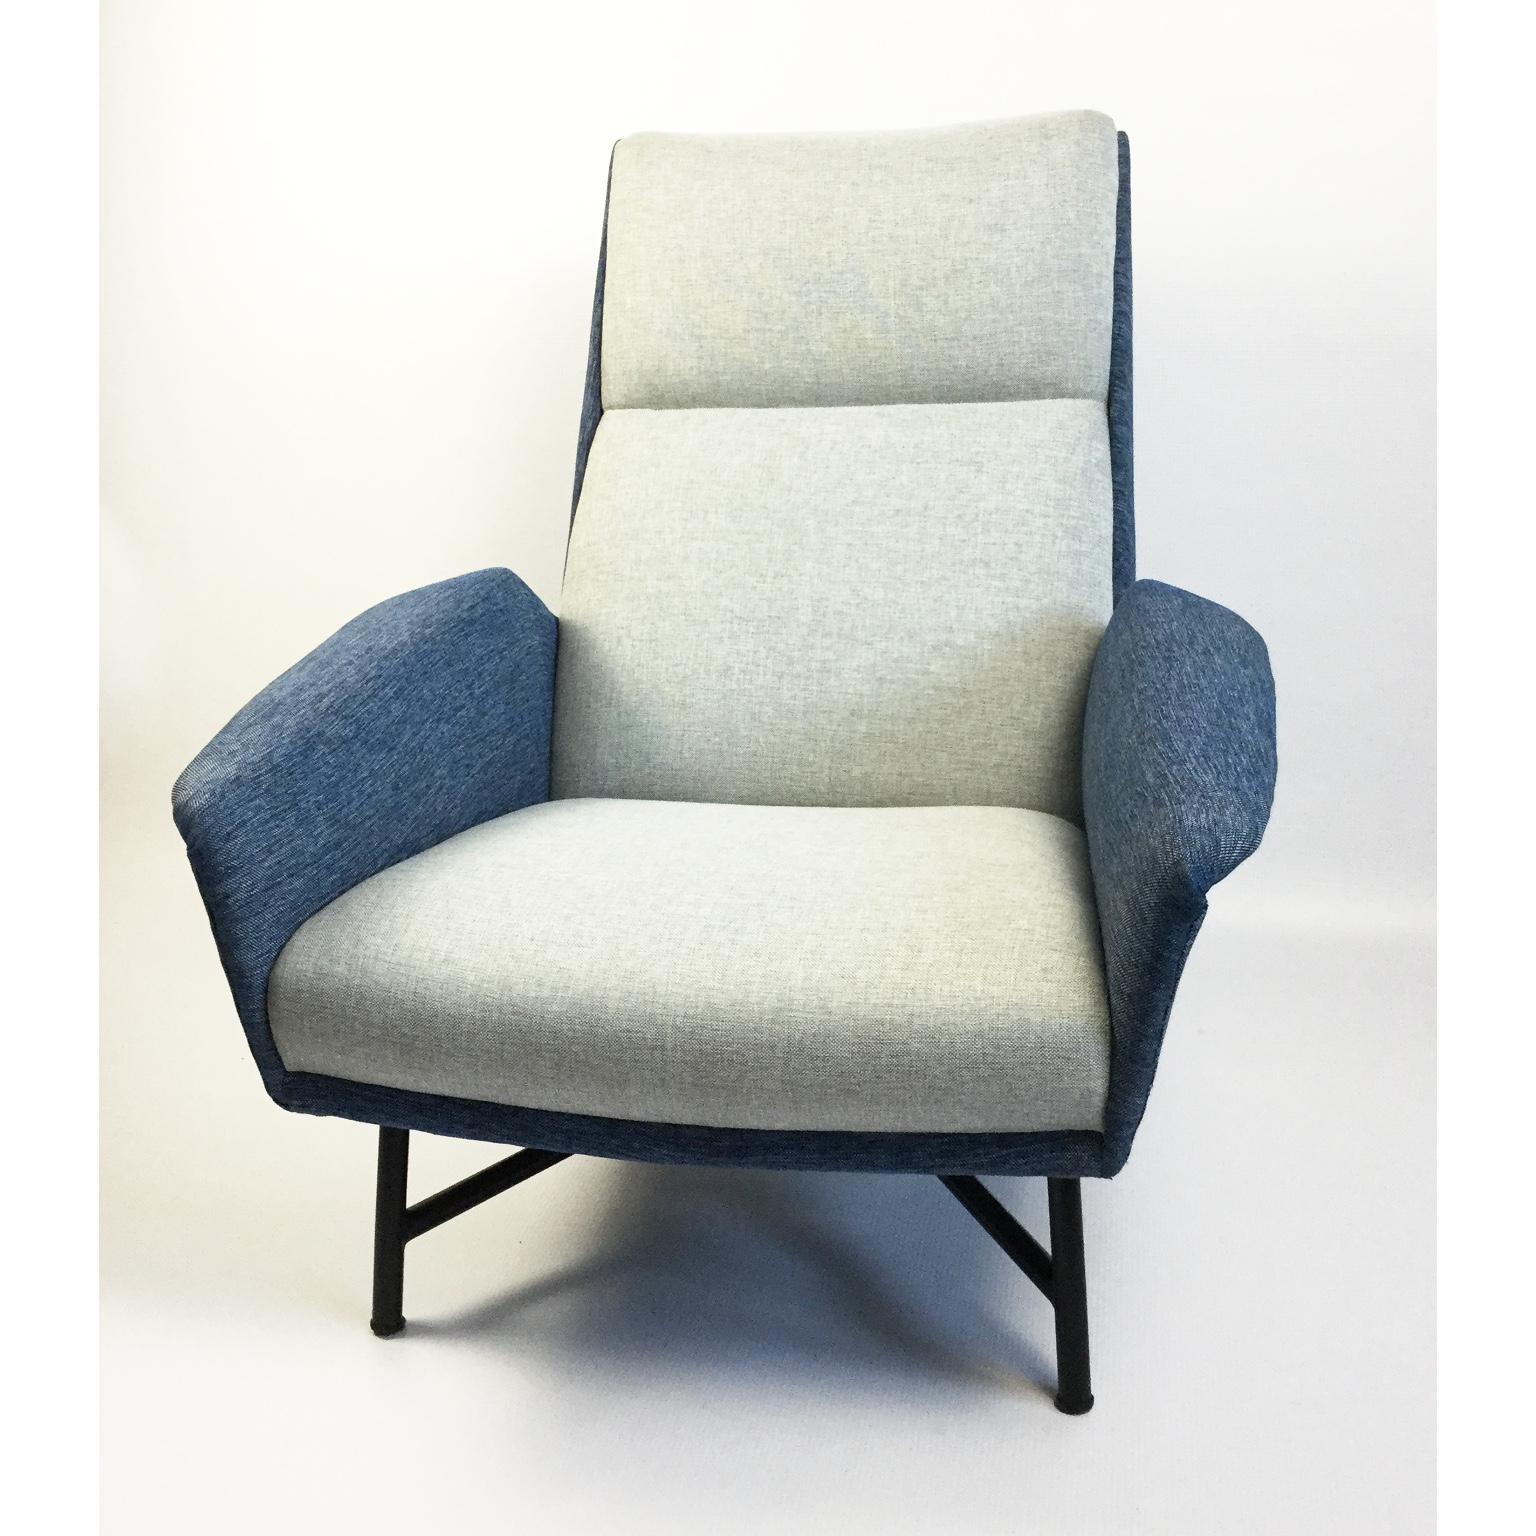 1950s armchair designed by Claude Vassal and edited by Claude Delor
Black metal structure and re-upholstered with heather blue and white fabric.
  